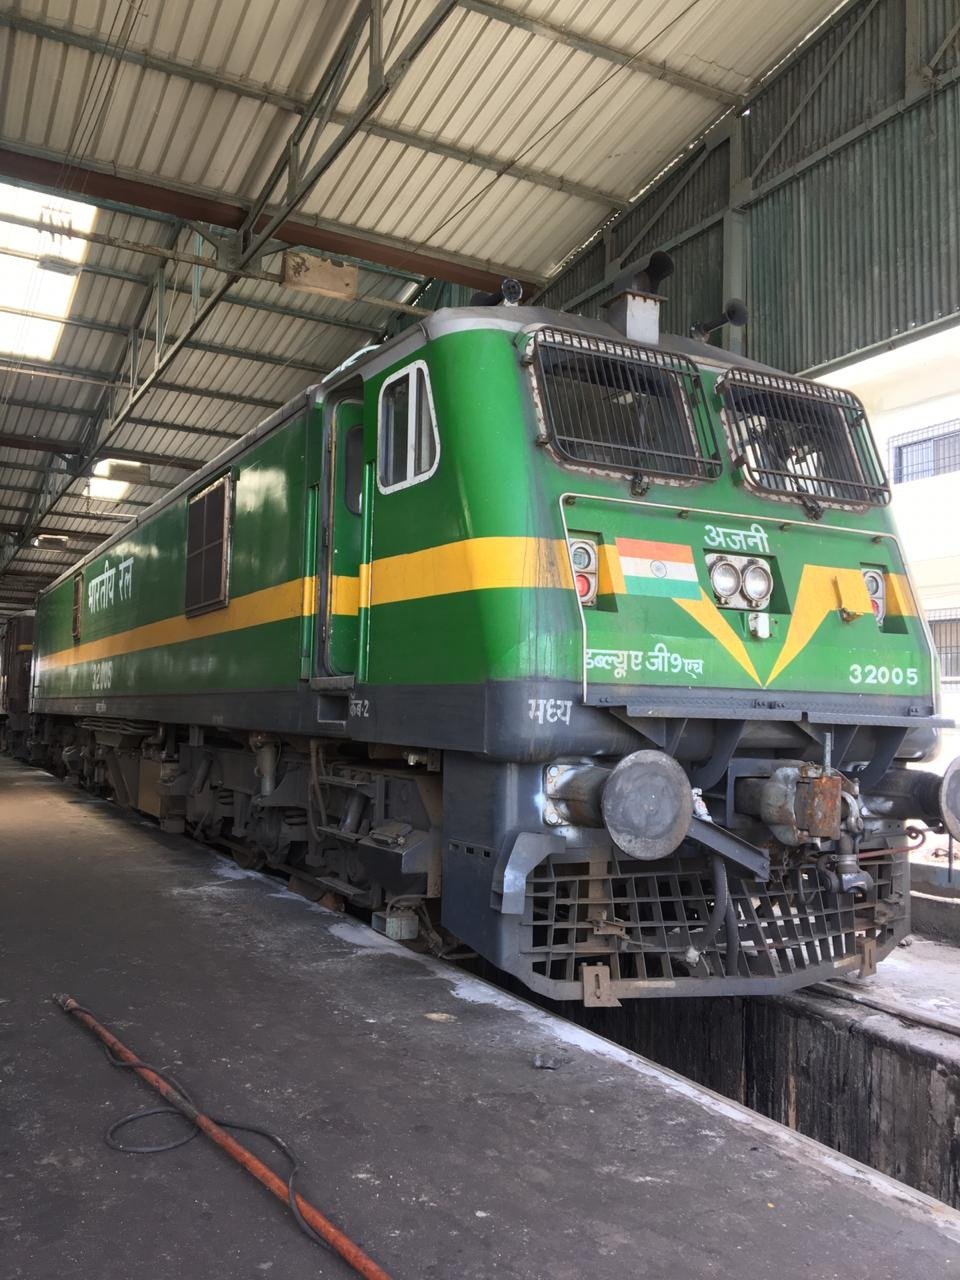 Railpost In Valsad Electric Locomotive Shed Of Western Railway Gets Its First Three Phase Locomotive Wag 9 305 Was Transferred To Valsad From Ajni Els Of Central Railway Westernrly T Co Ztkywqadmq Twitter